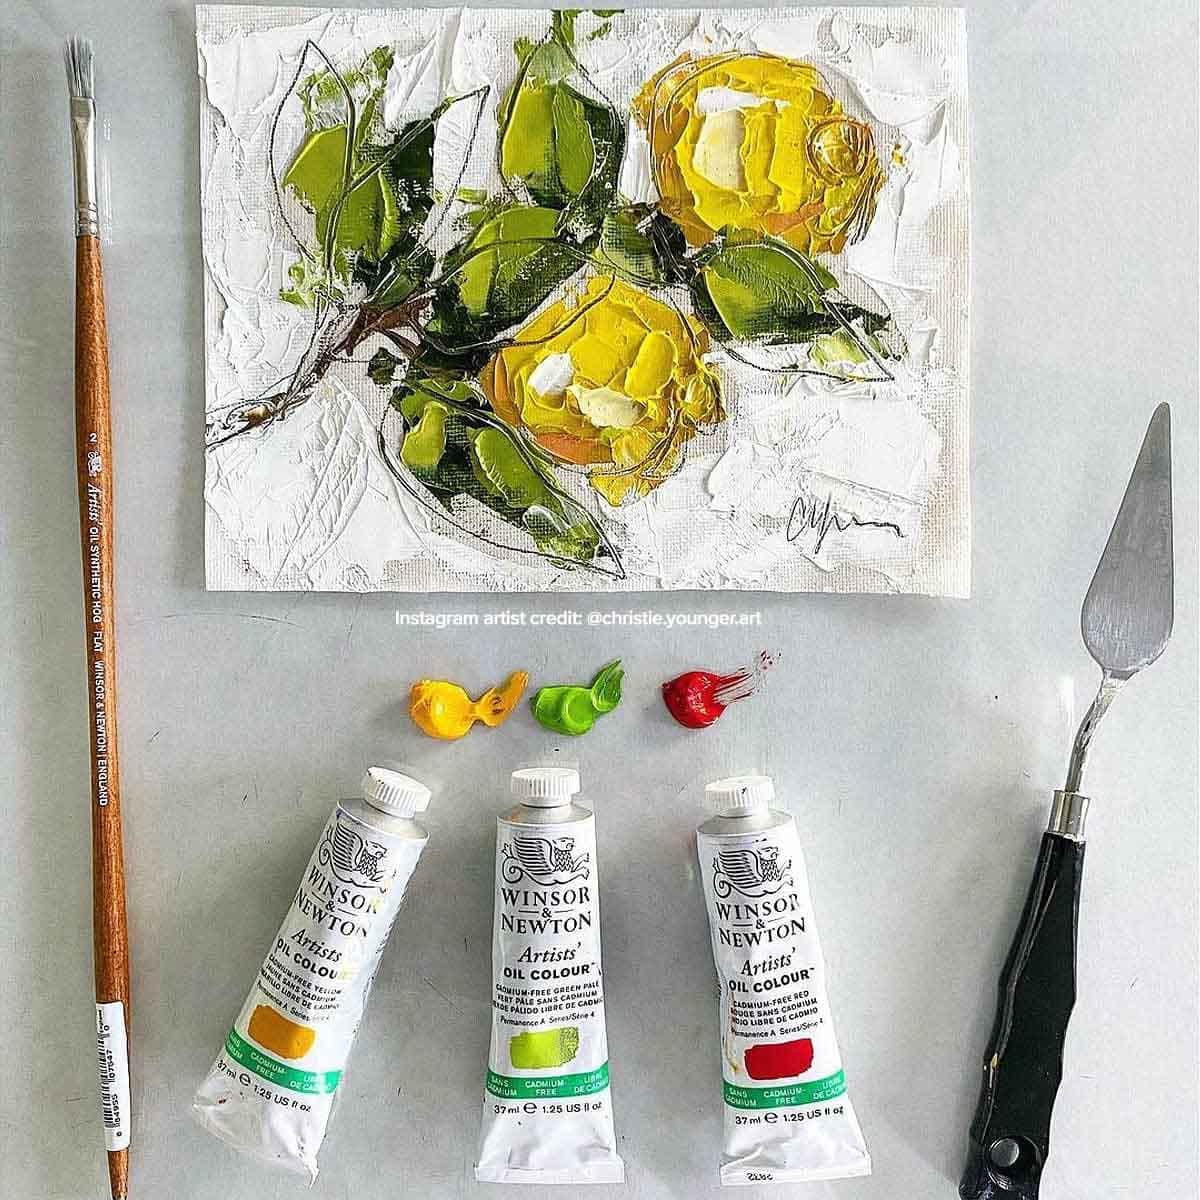 Winsor & Newton Artists' Oil Colors in use